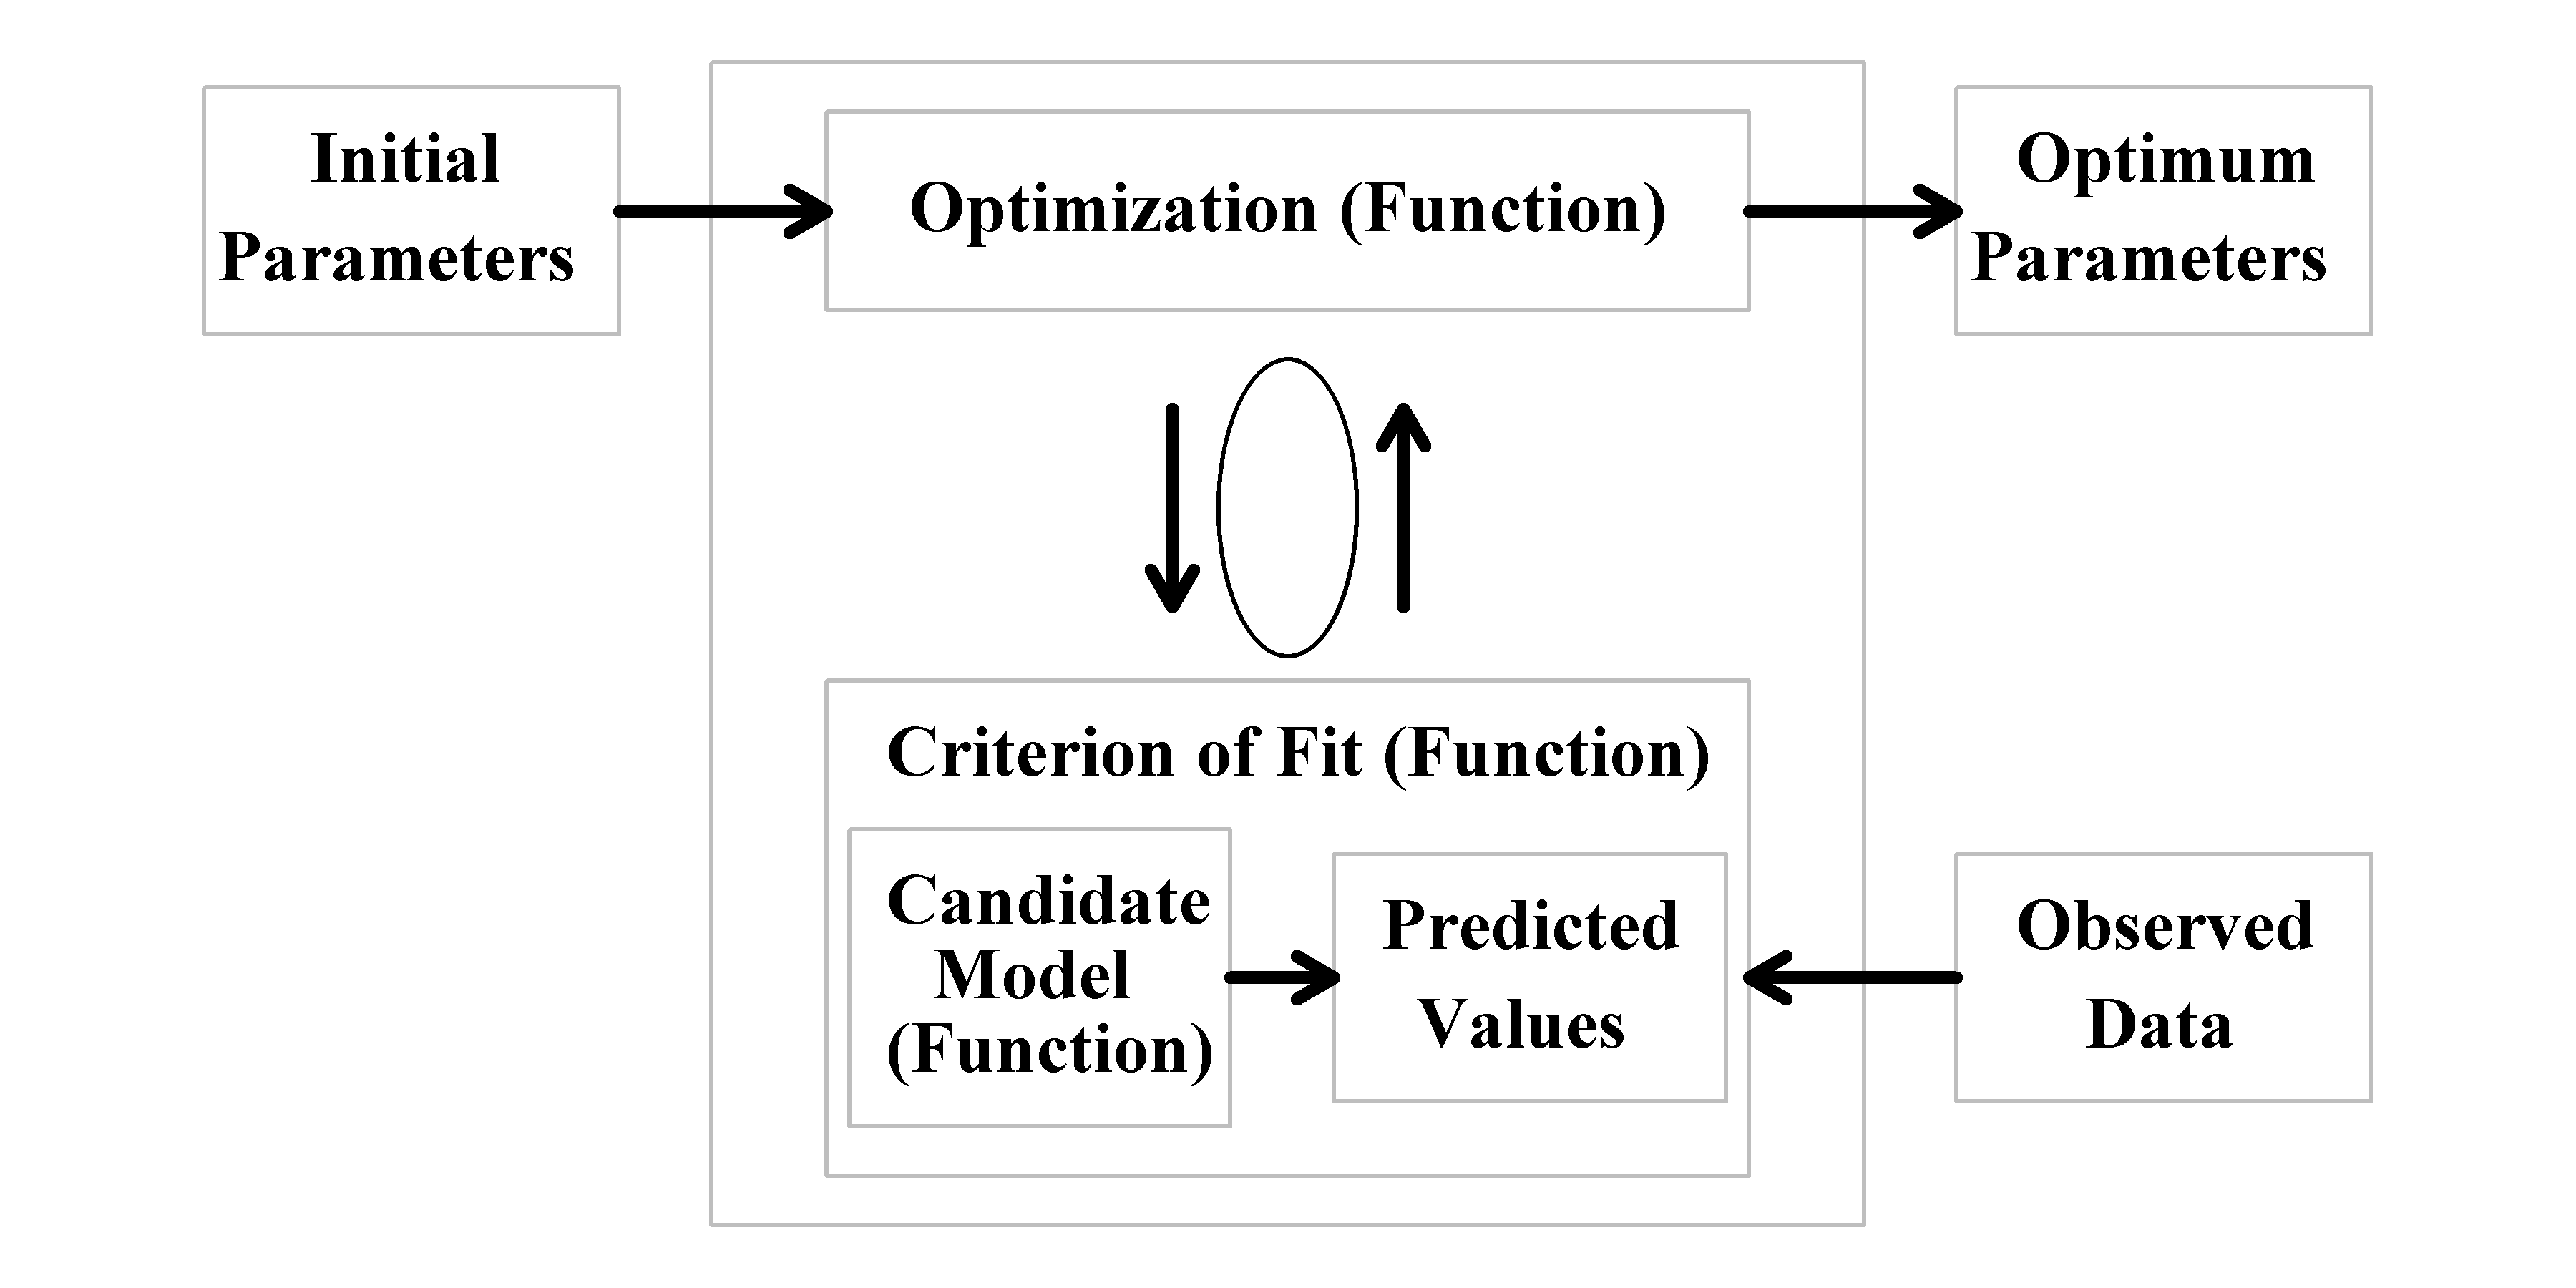 Inputs, functional requirements, and outputs, when fitting a model to data. The optimization function (here nlm()) minimizes the negative log-likelihood (or sum-of squares) and requires an initial parameter vector to begin. In addition, the optimizer requires a function (perhaps negLL()) to calculate the corresponding negative log-likelihood for each vector of parameters it produces in its search for the minimum. To calculate the negative log-likelihood requires a function (perhaps vB()) to generate predicted values for comparison with the input observed values.